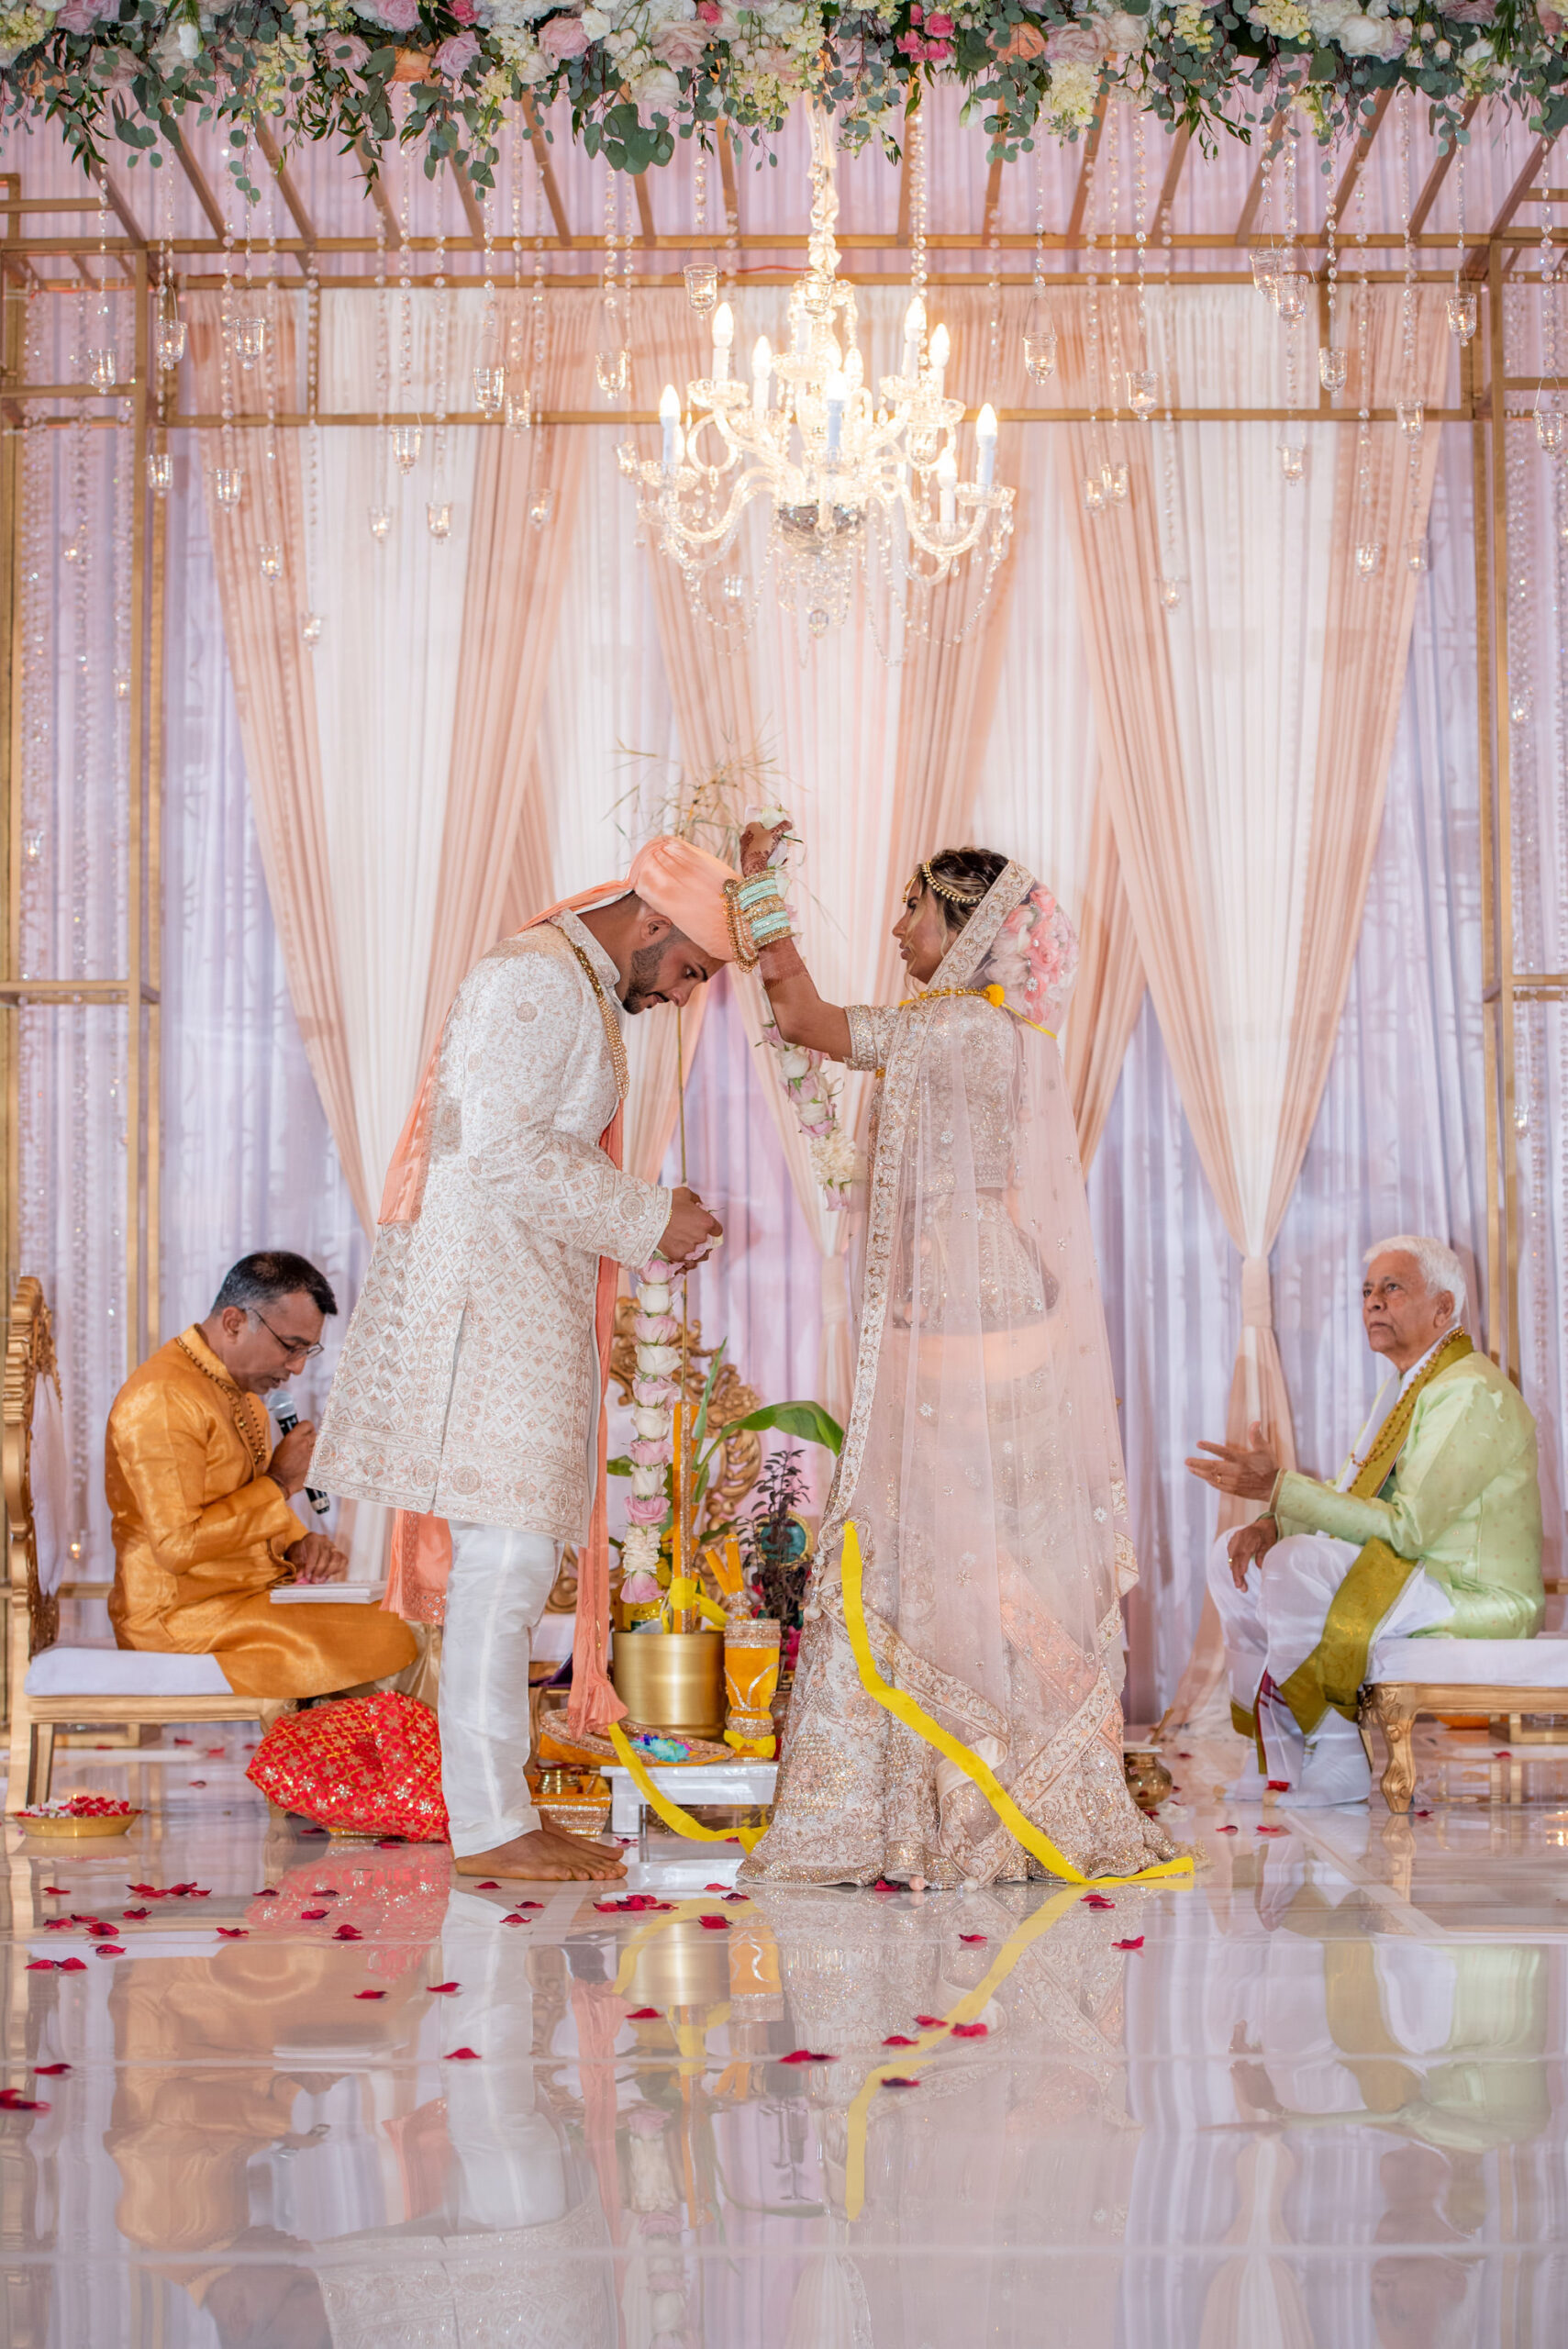 Luxurious Indian Wedding Ceremony, Bride and Groom Wearing Turban, Head Covering, Saree, Rose Gold, Blush Pink Florals with Chandelier Lighting and Draping | Florida Wedding Venue Hilton Downtown Tampa